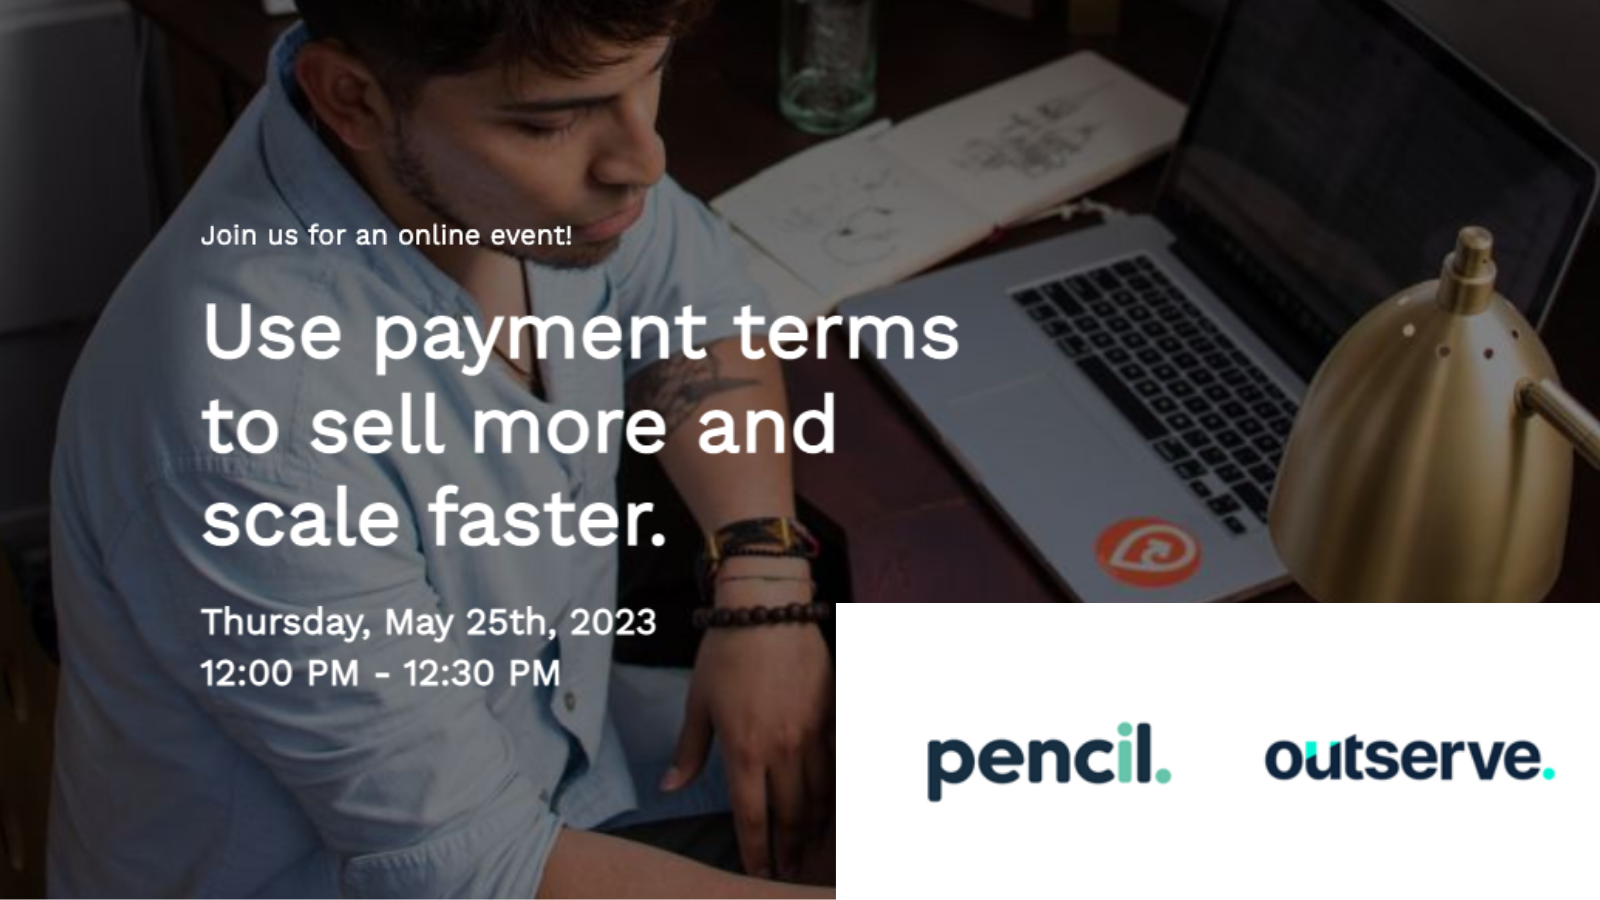 Webinar: Use payment terms to sell more and scale faster